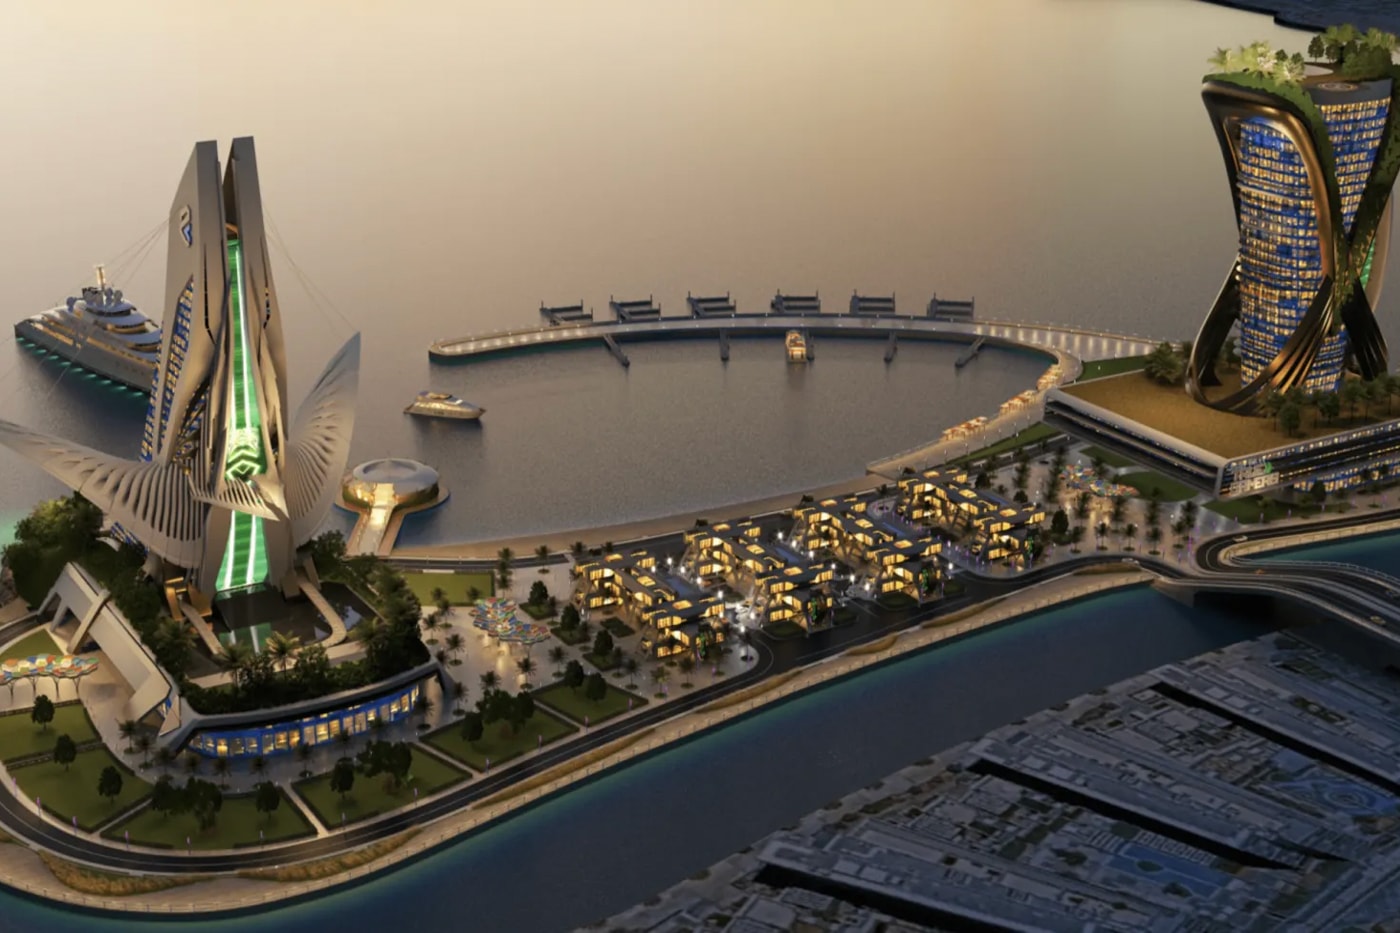 Abu Dhabi To Build World's First eSports Island Costing $280 Million USD hotel high-tech venues gaming tournaments middle east arabia training facilities content creation spaces gaming 